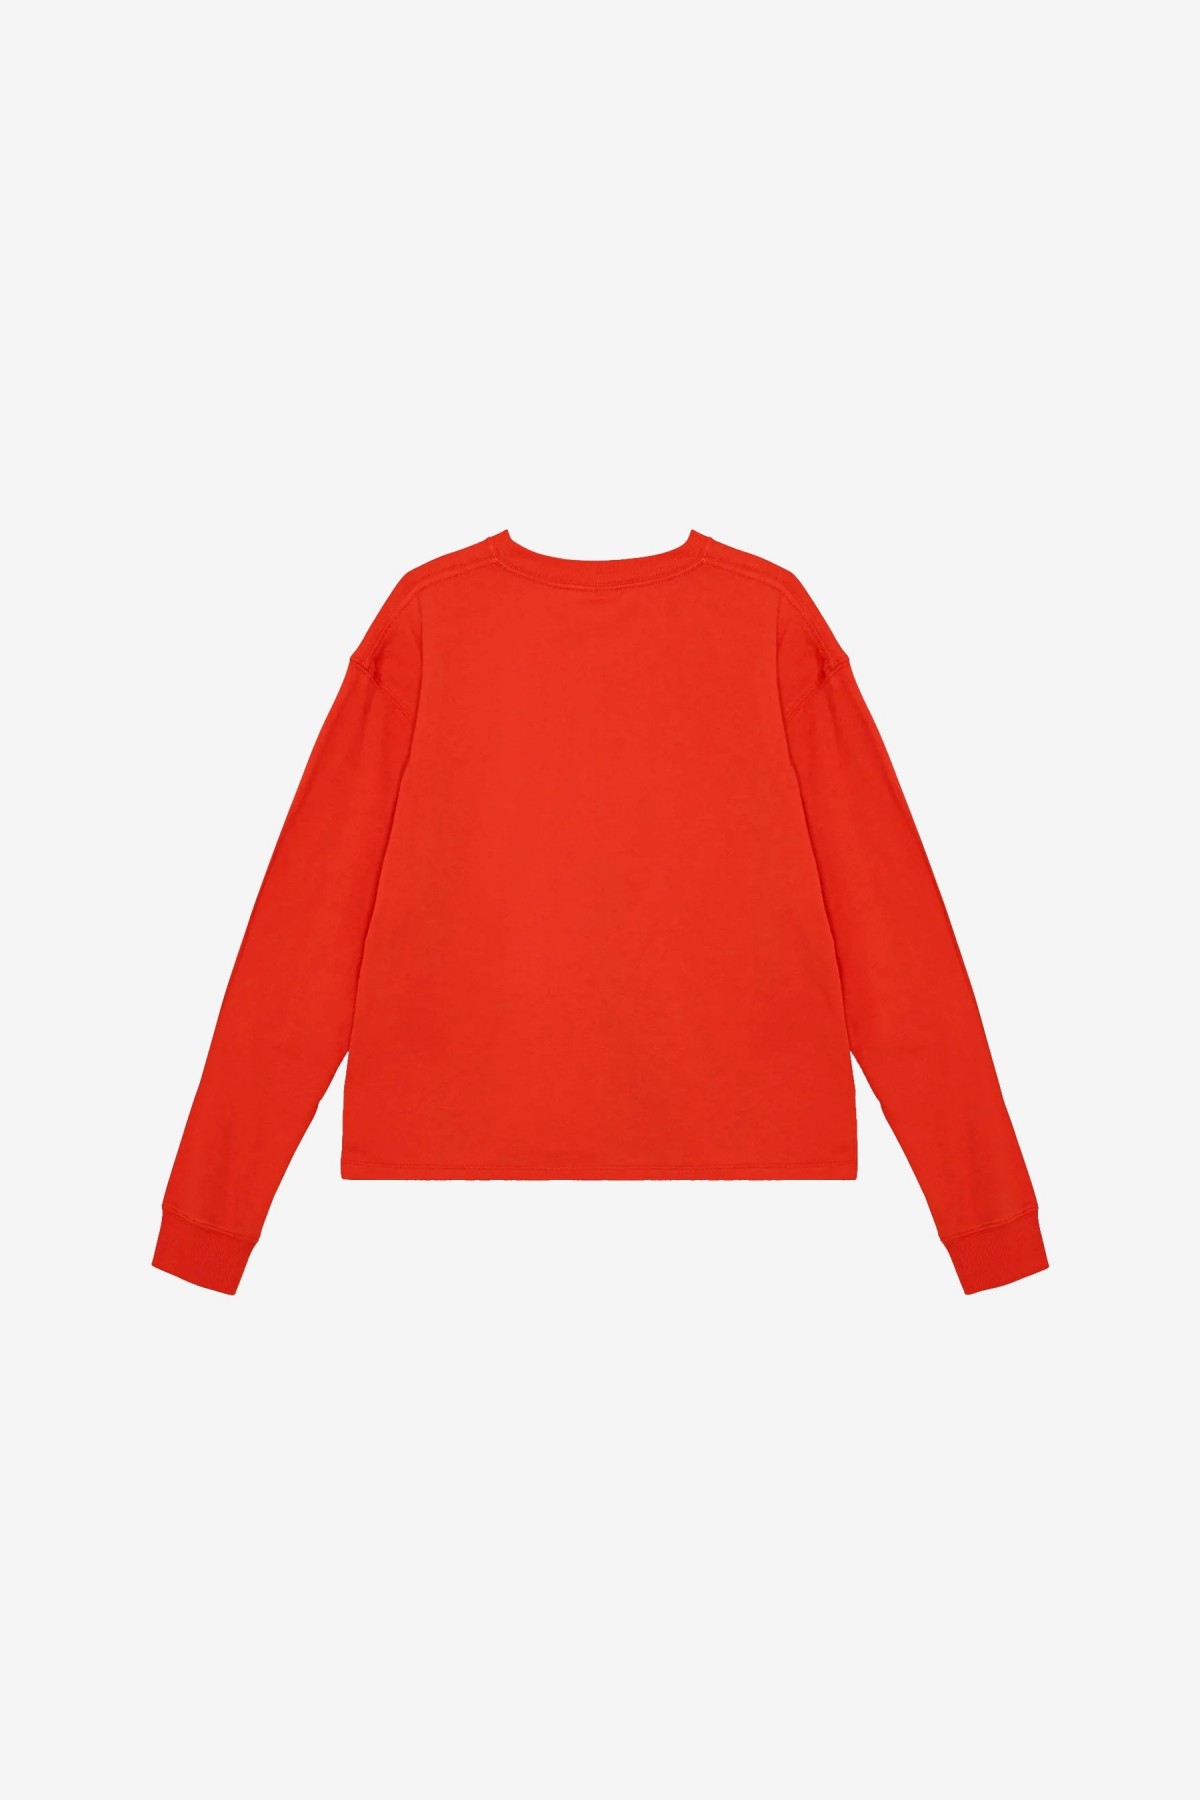 Soulland Dinah Long Sleeve T-Shirt in Red